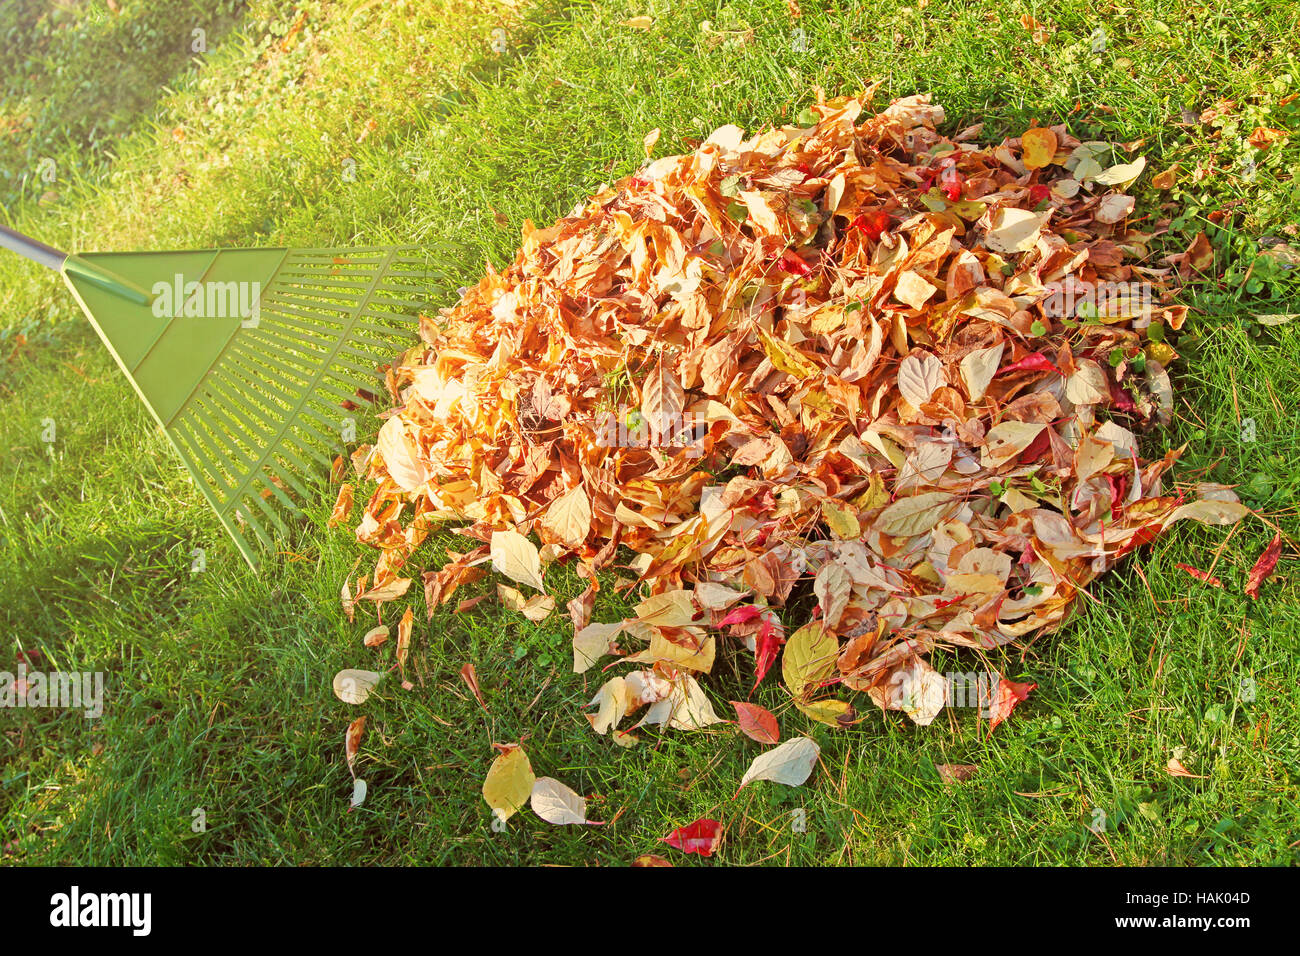 pile of fall leaves with fan rake on lawn Stock Photo